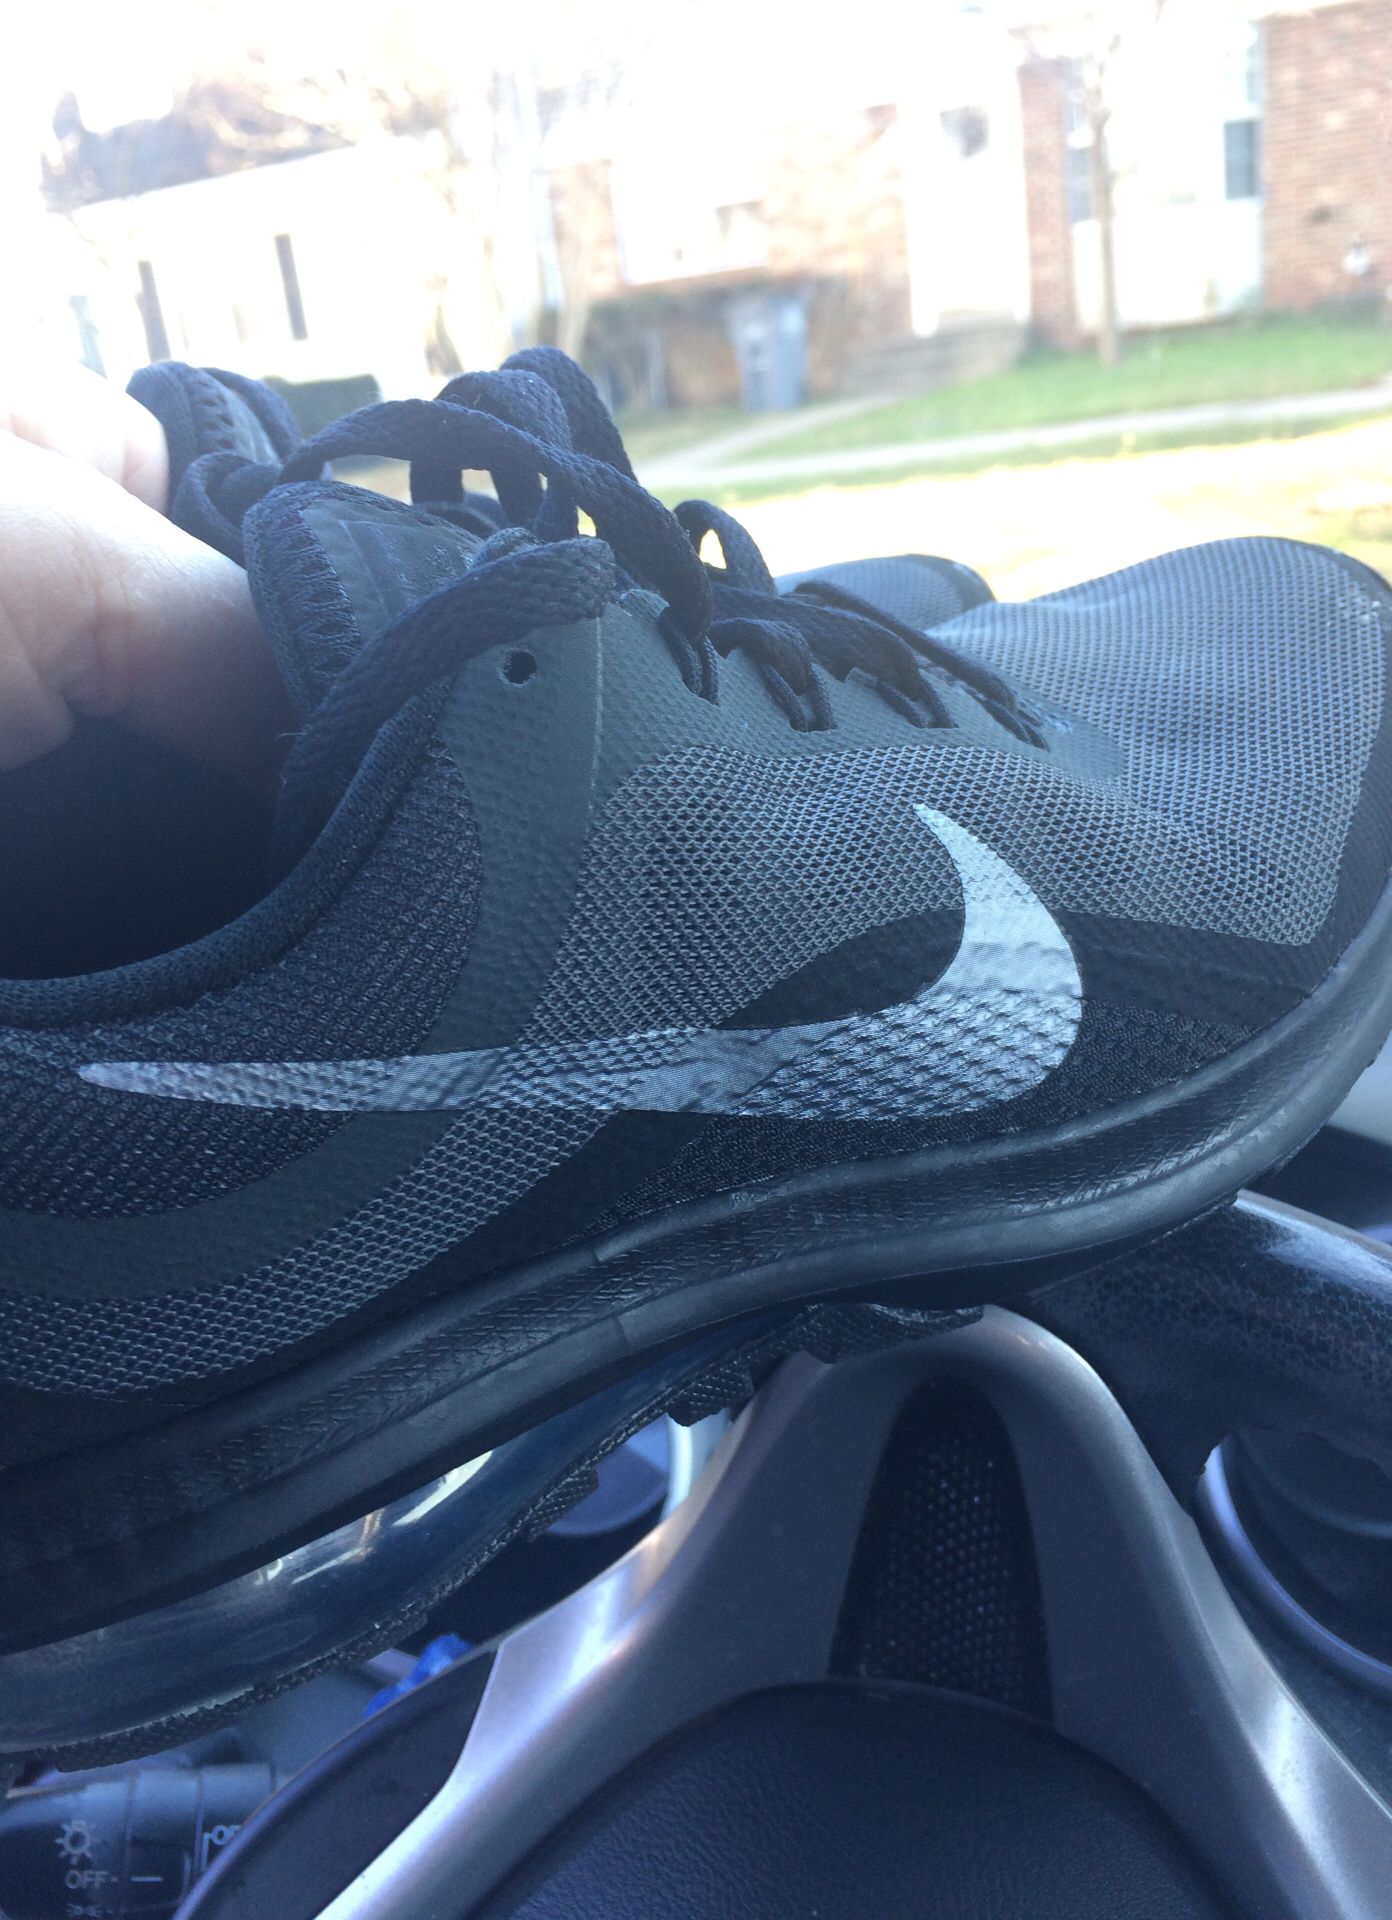 Nike tennis shoes gray and black